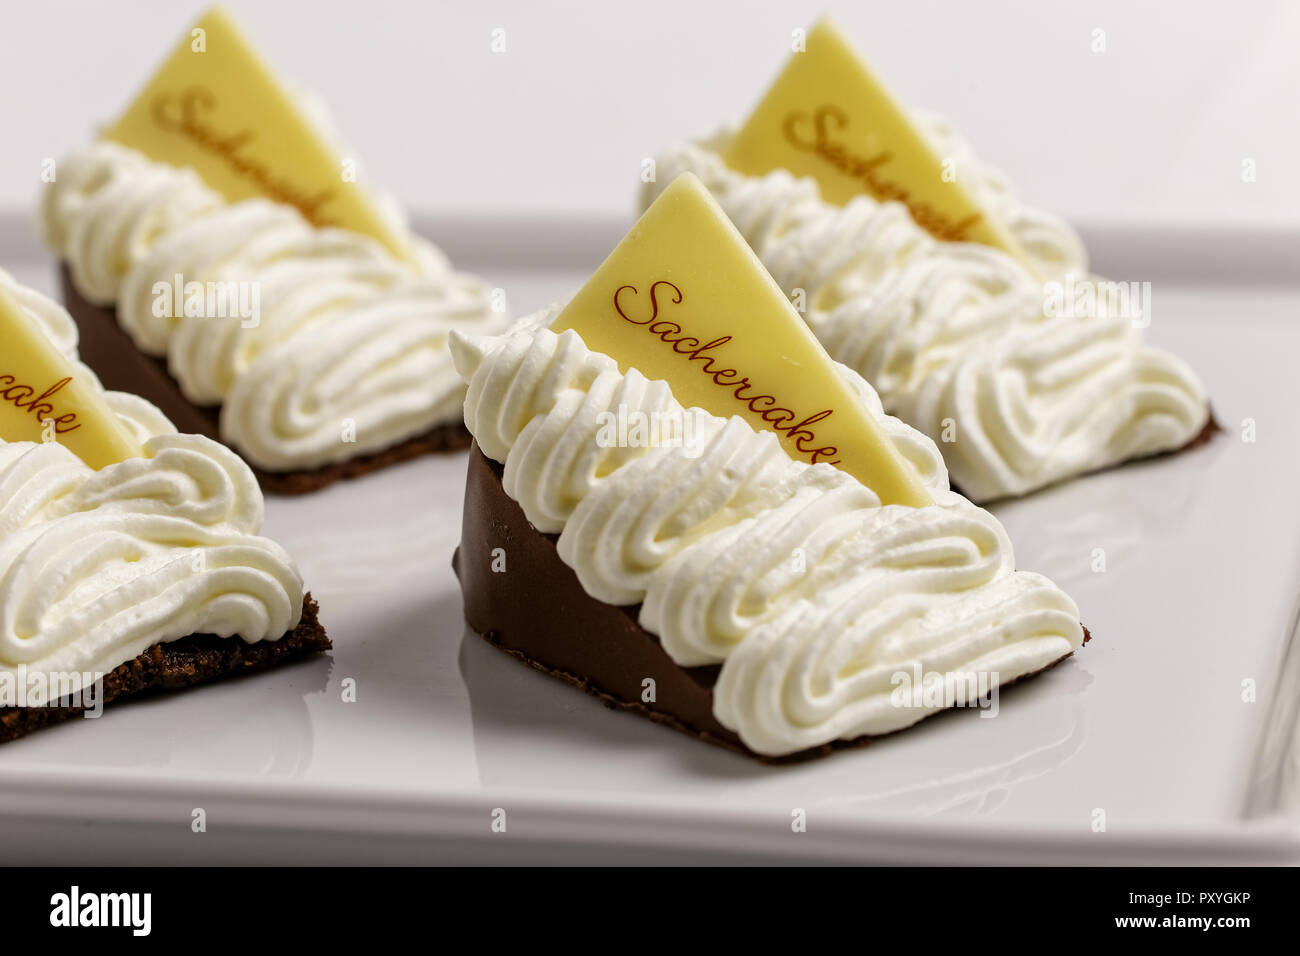 Closeup of four portions of  sacher cake decorated with cream on white tray. Stock Photo